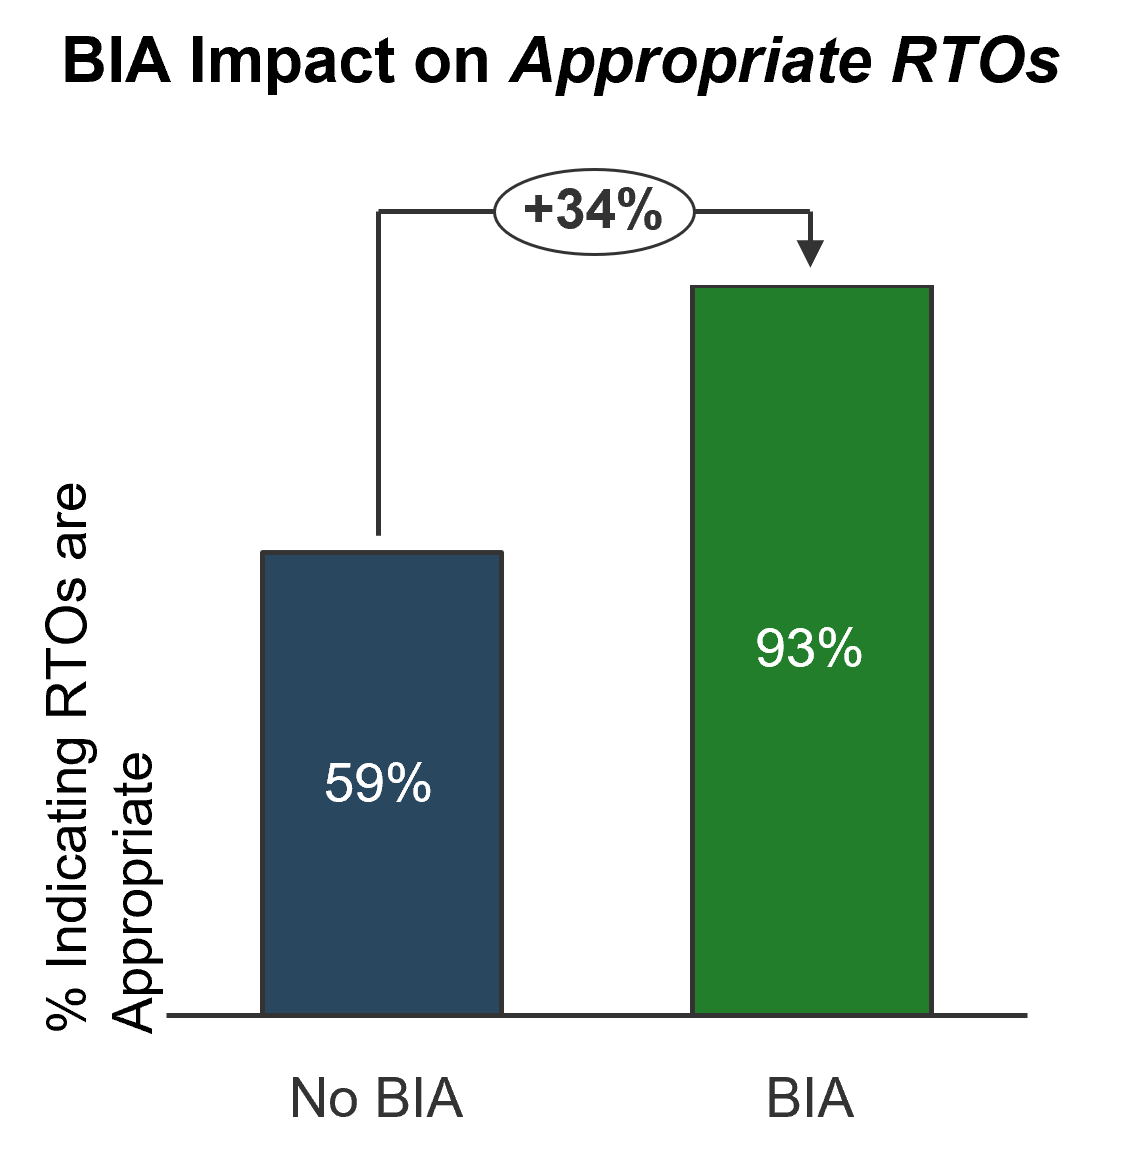 The image contains a graph that is labelled: BIA Impact on Appropriate RTOS. With no BIA, there is 59% RTOs are appropriate. With BIA, there is 93% RTOS being appropriate.